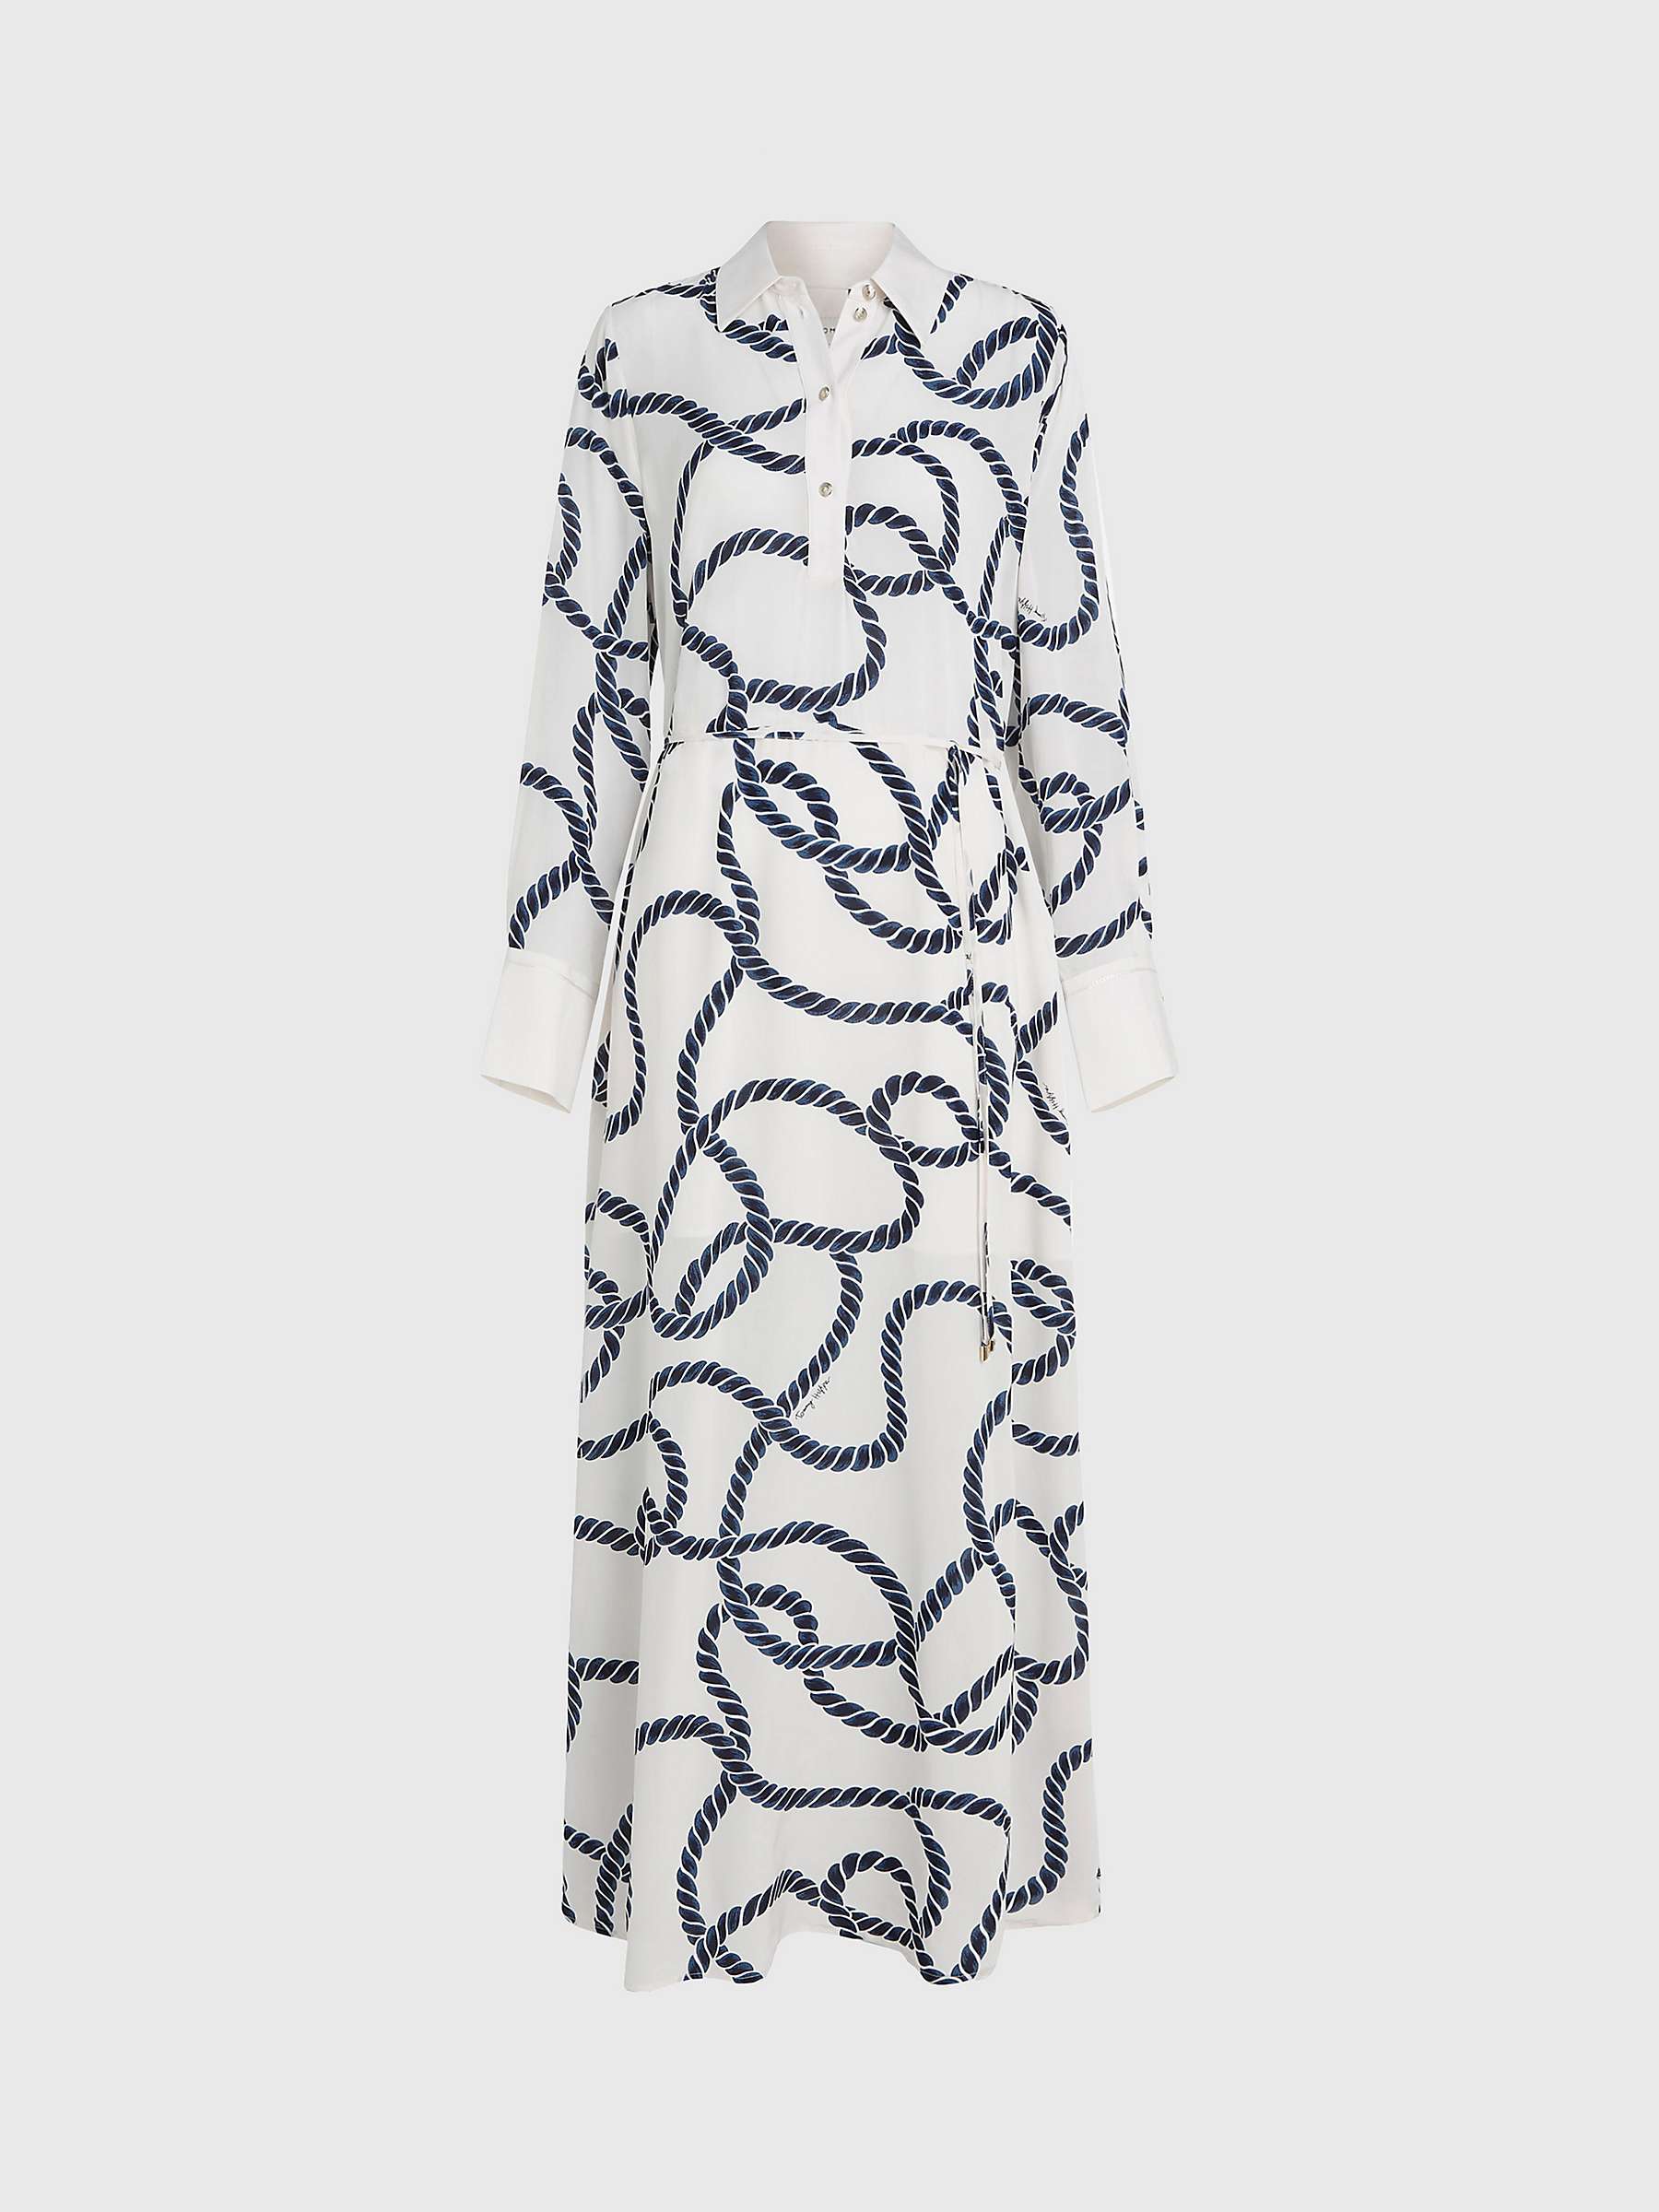 Buy Tommy Hilfiger Rope Print Maxi Dress, White/Navy Online at johnlewis.com